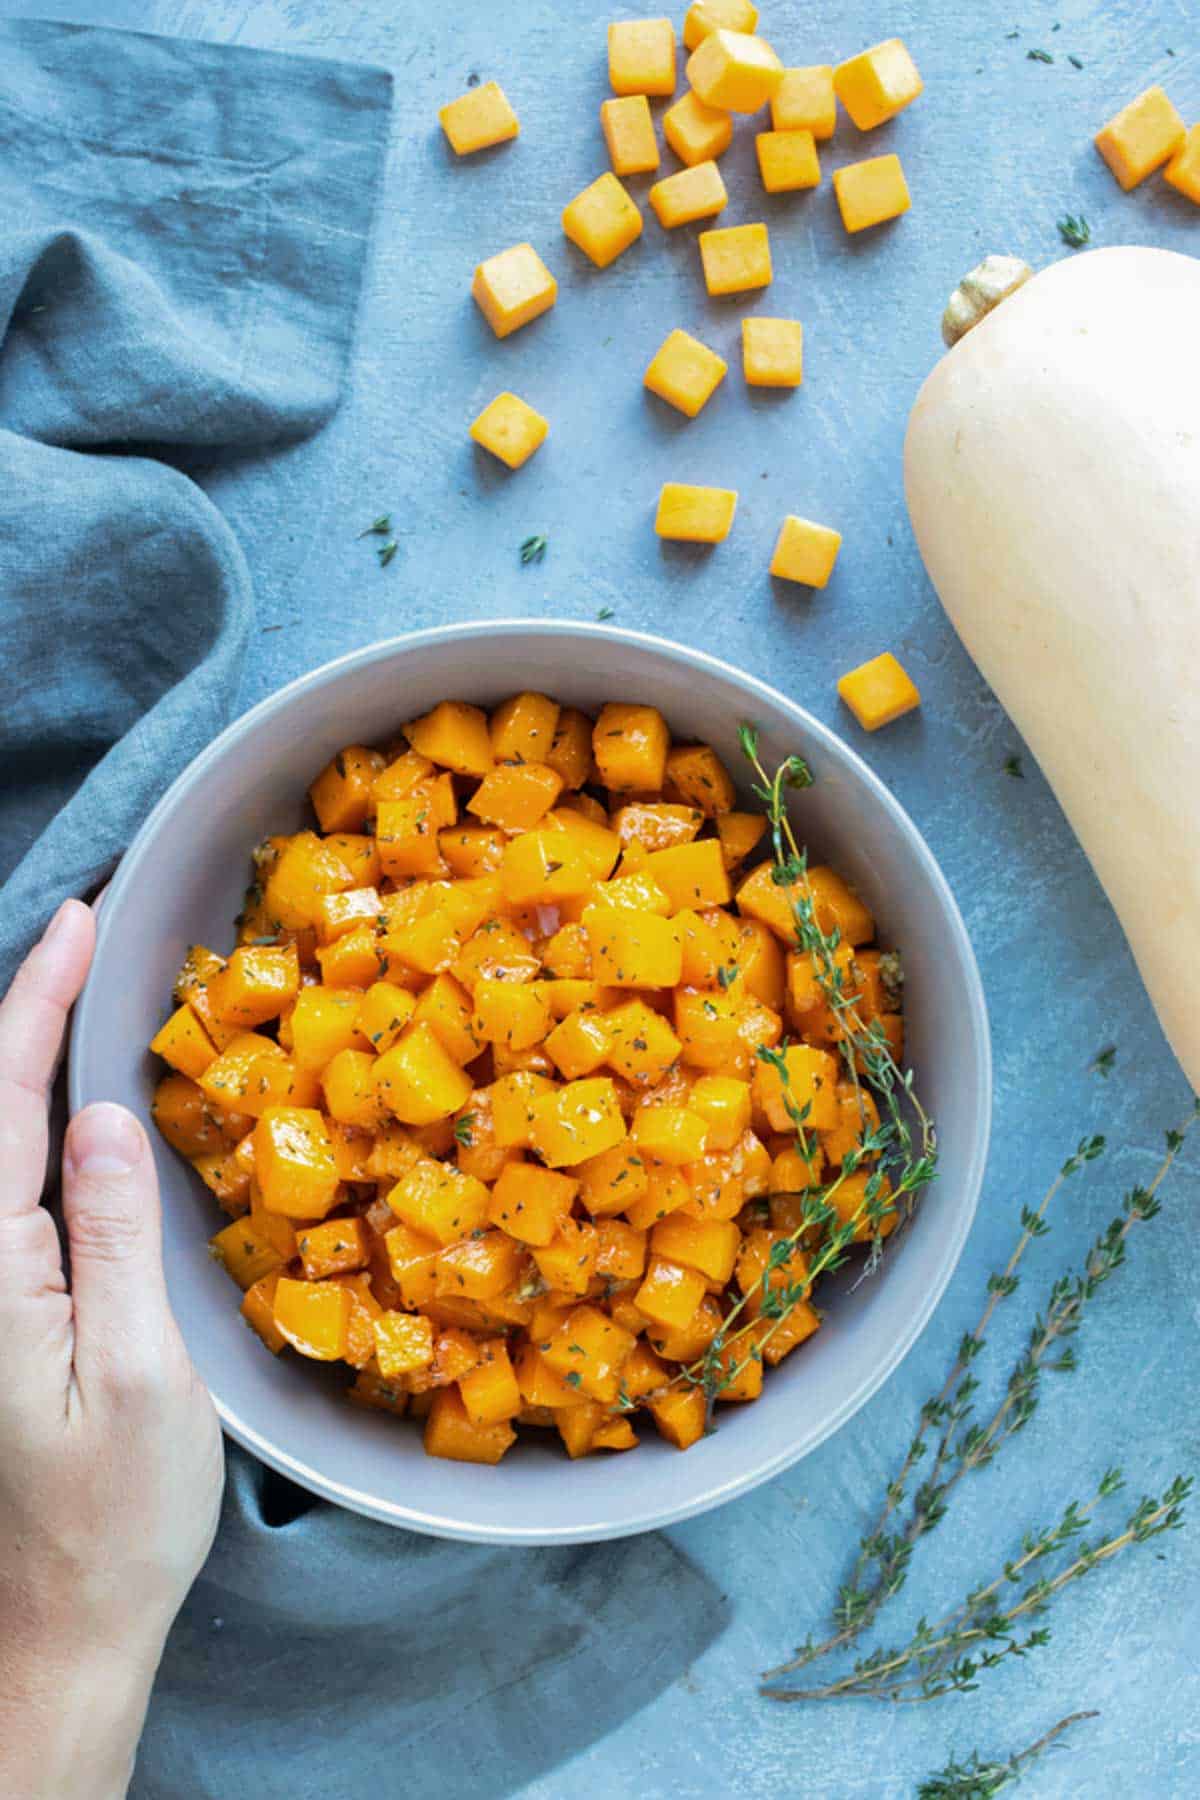 A serving bowl full of butternut squash that has been baked in the oven for a healthy Thanksgiving side dish recipe.